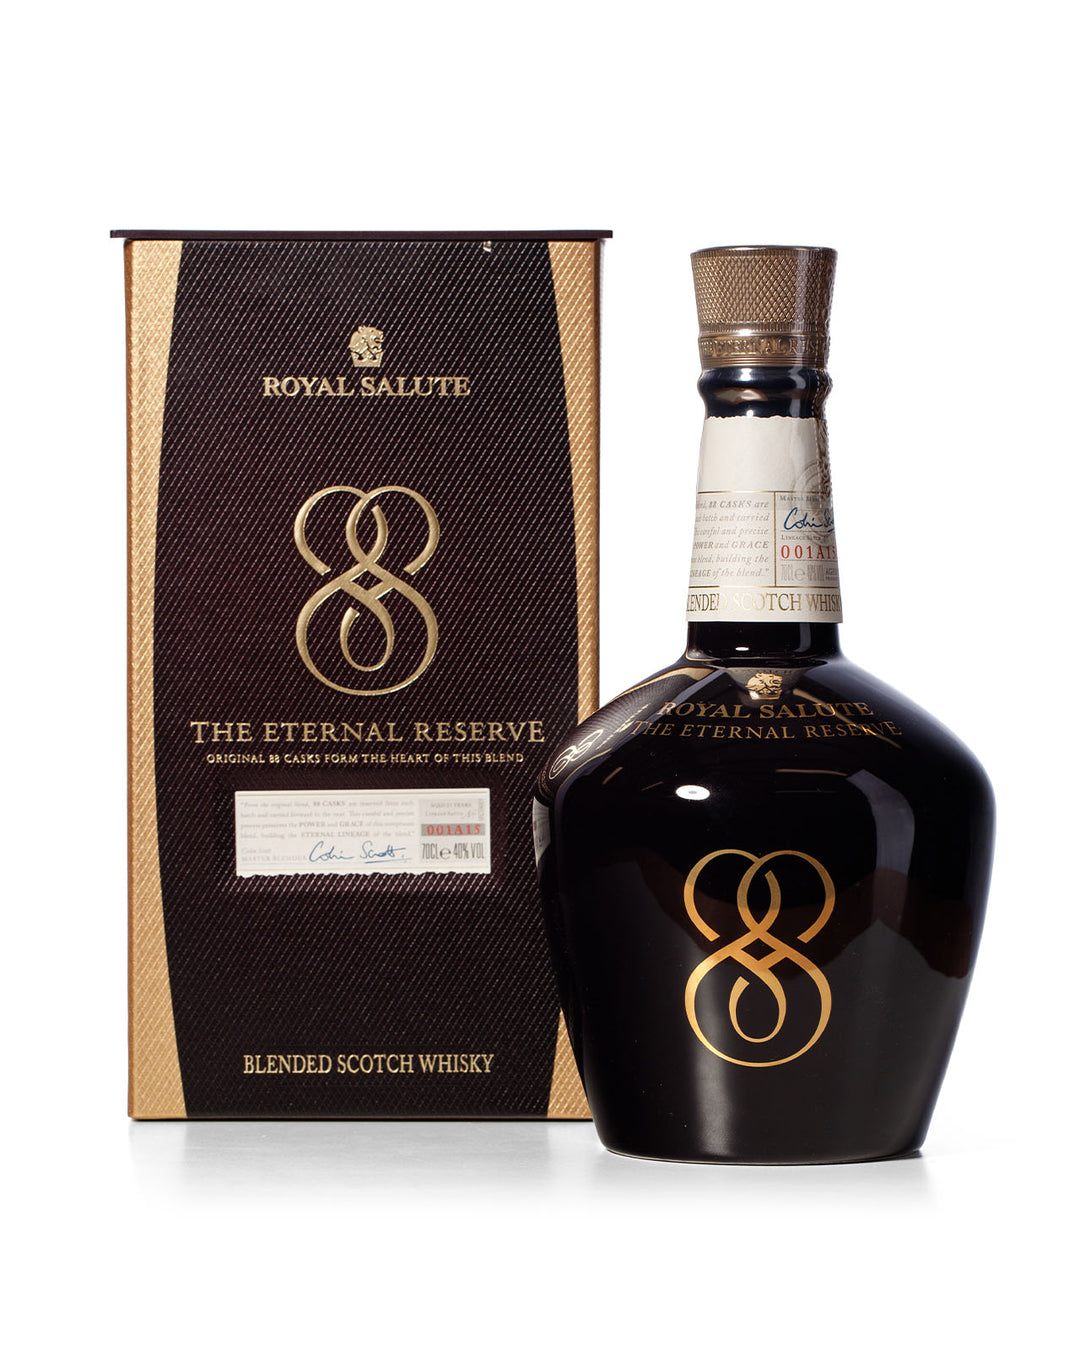 Royal Salute 21 Year Old Eternal Reserve Bottled 2015 With Original Box